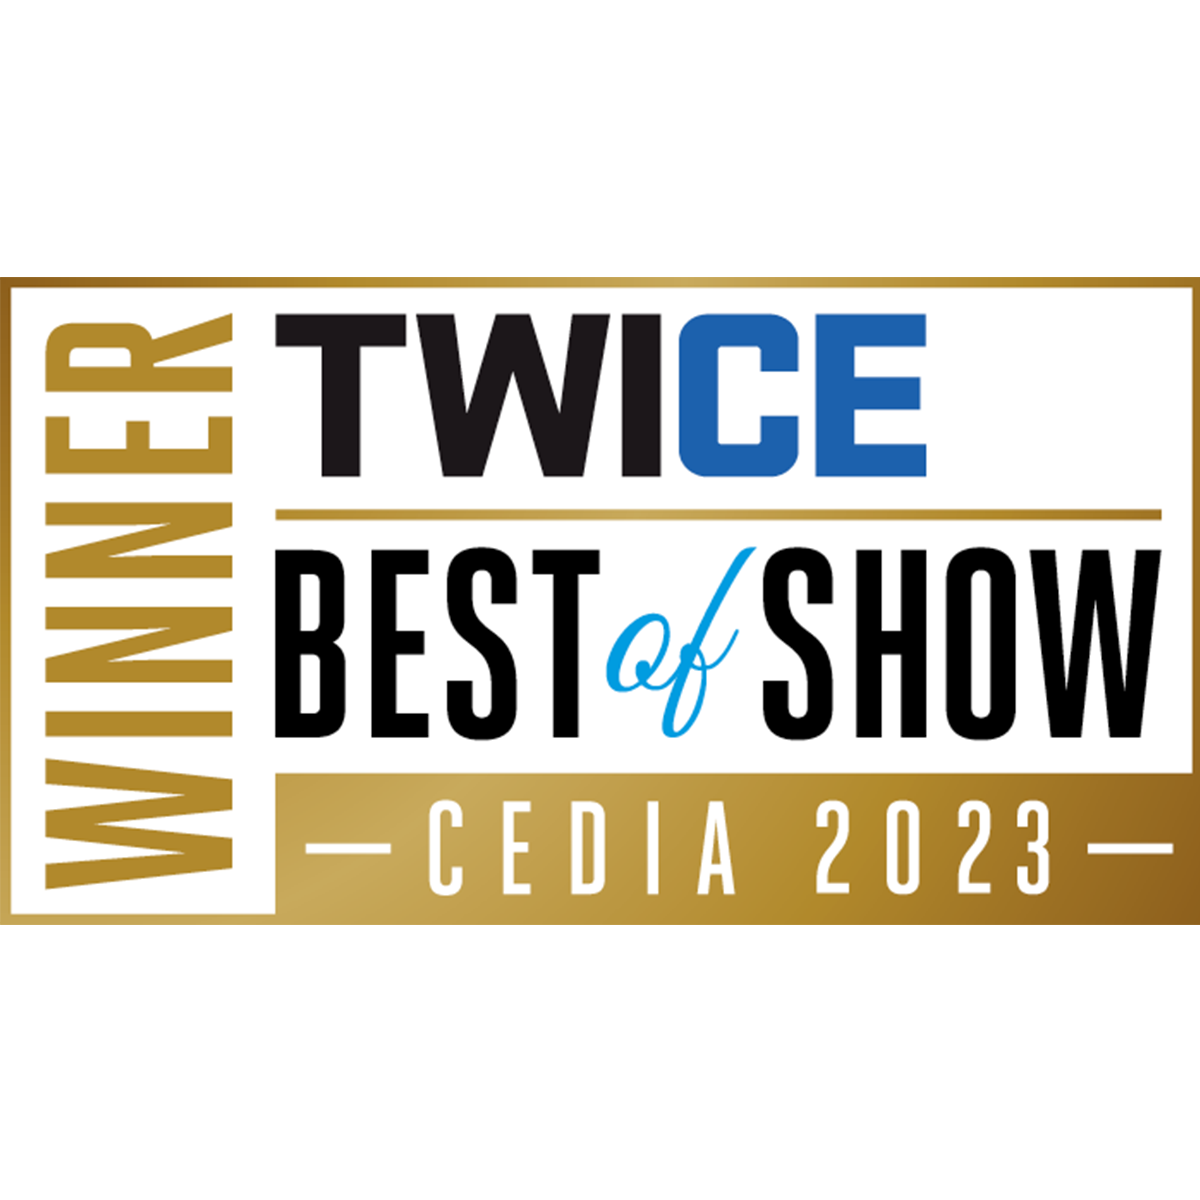 TWICE “Best of Show” at CEDIA